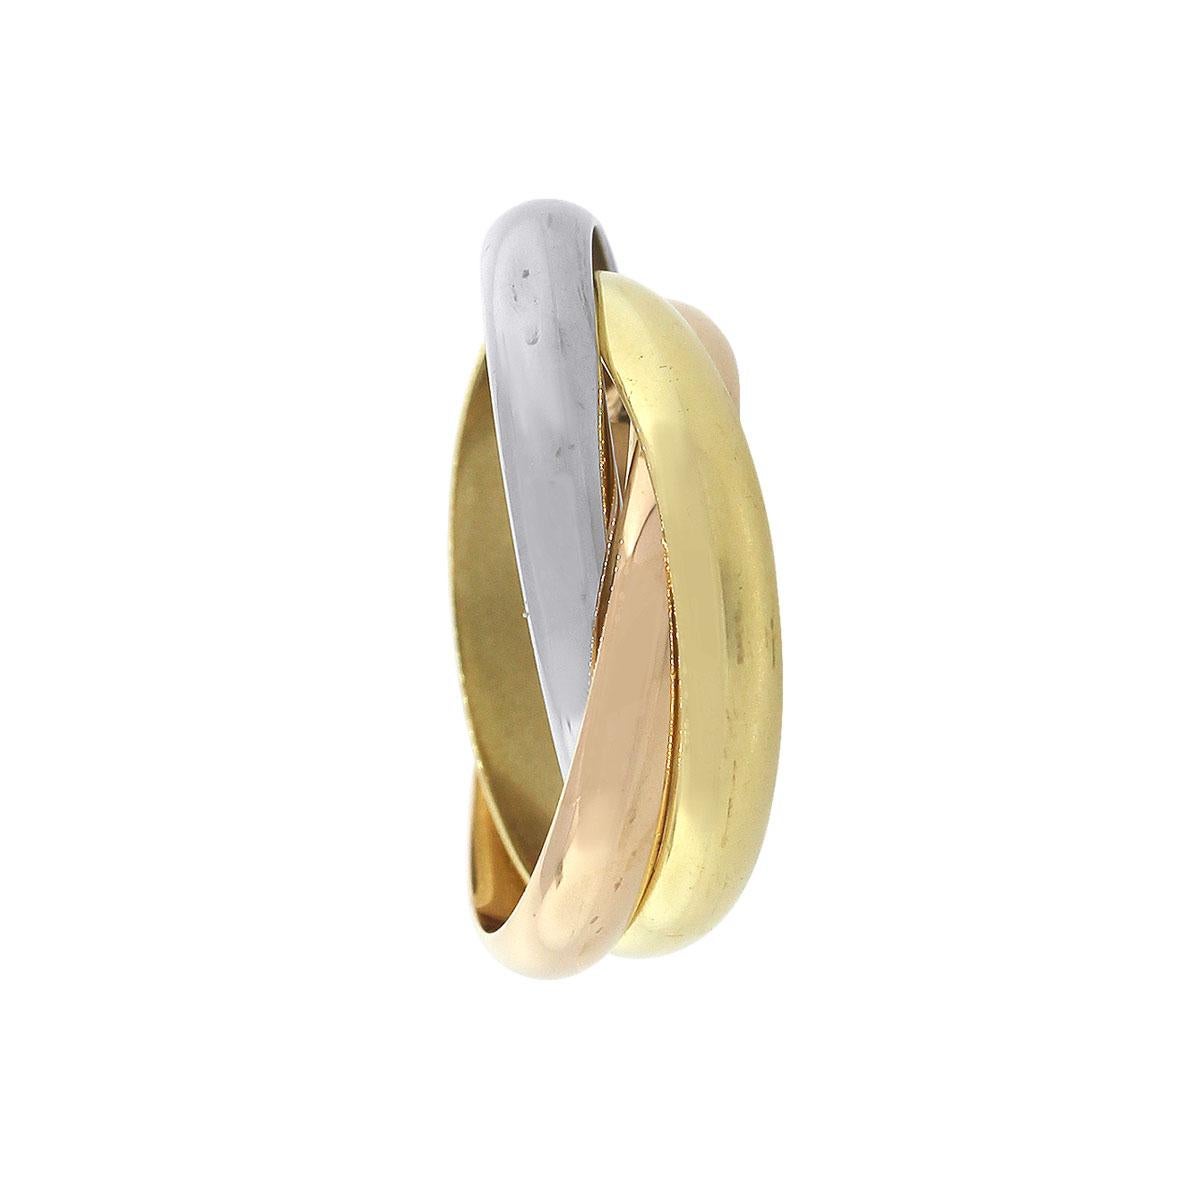 Designer: Cartier
Material: 18k white, yellow and rose gold
Ring Size: Cartier size 62
Ring Measurements: 0.82″ x 0.28″ x 0.80″
Total Weight: 13.1g (8.4dwt)
SKU: W2728